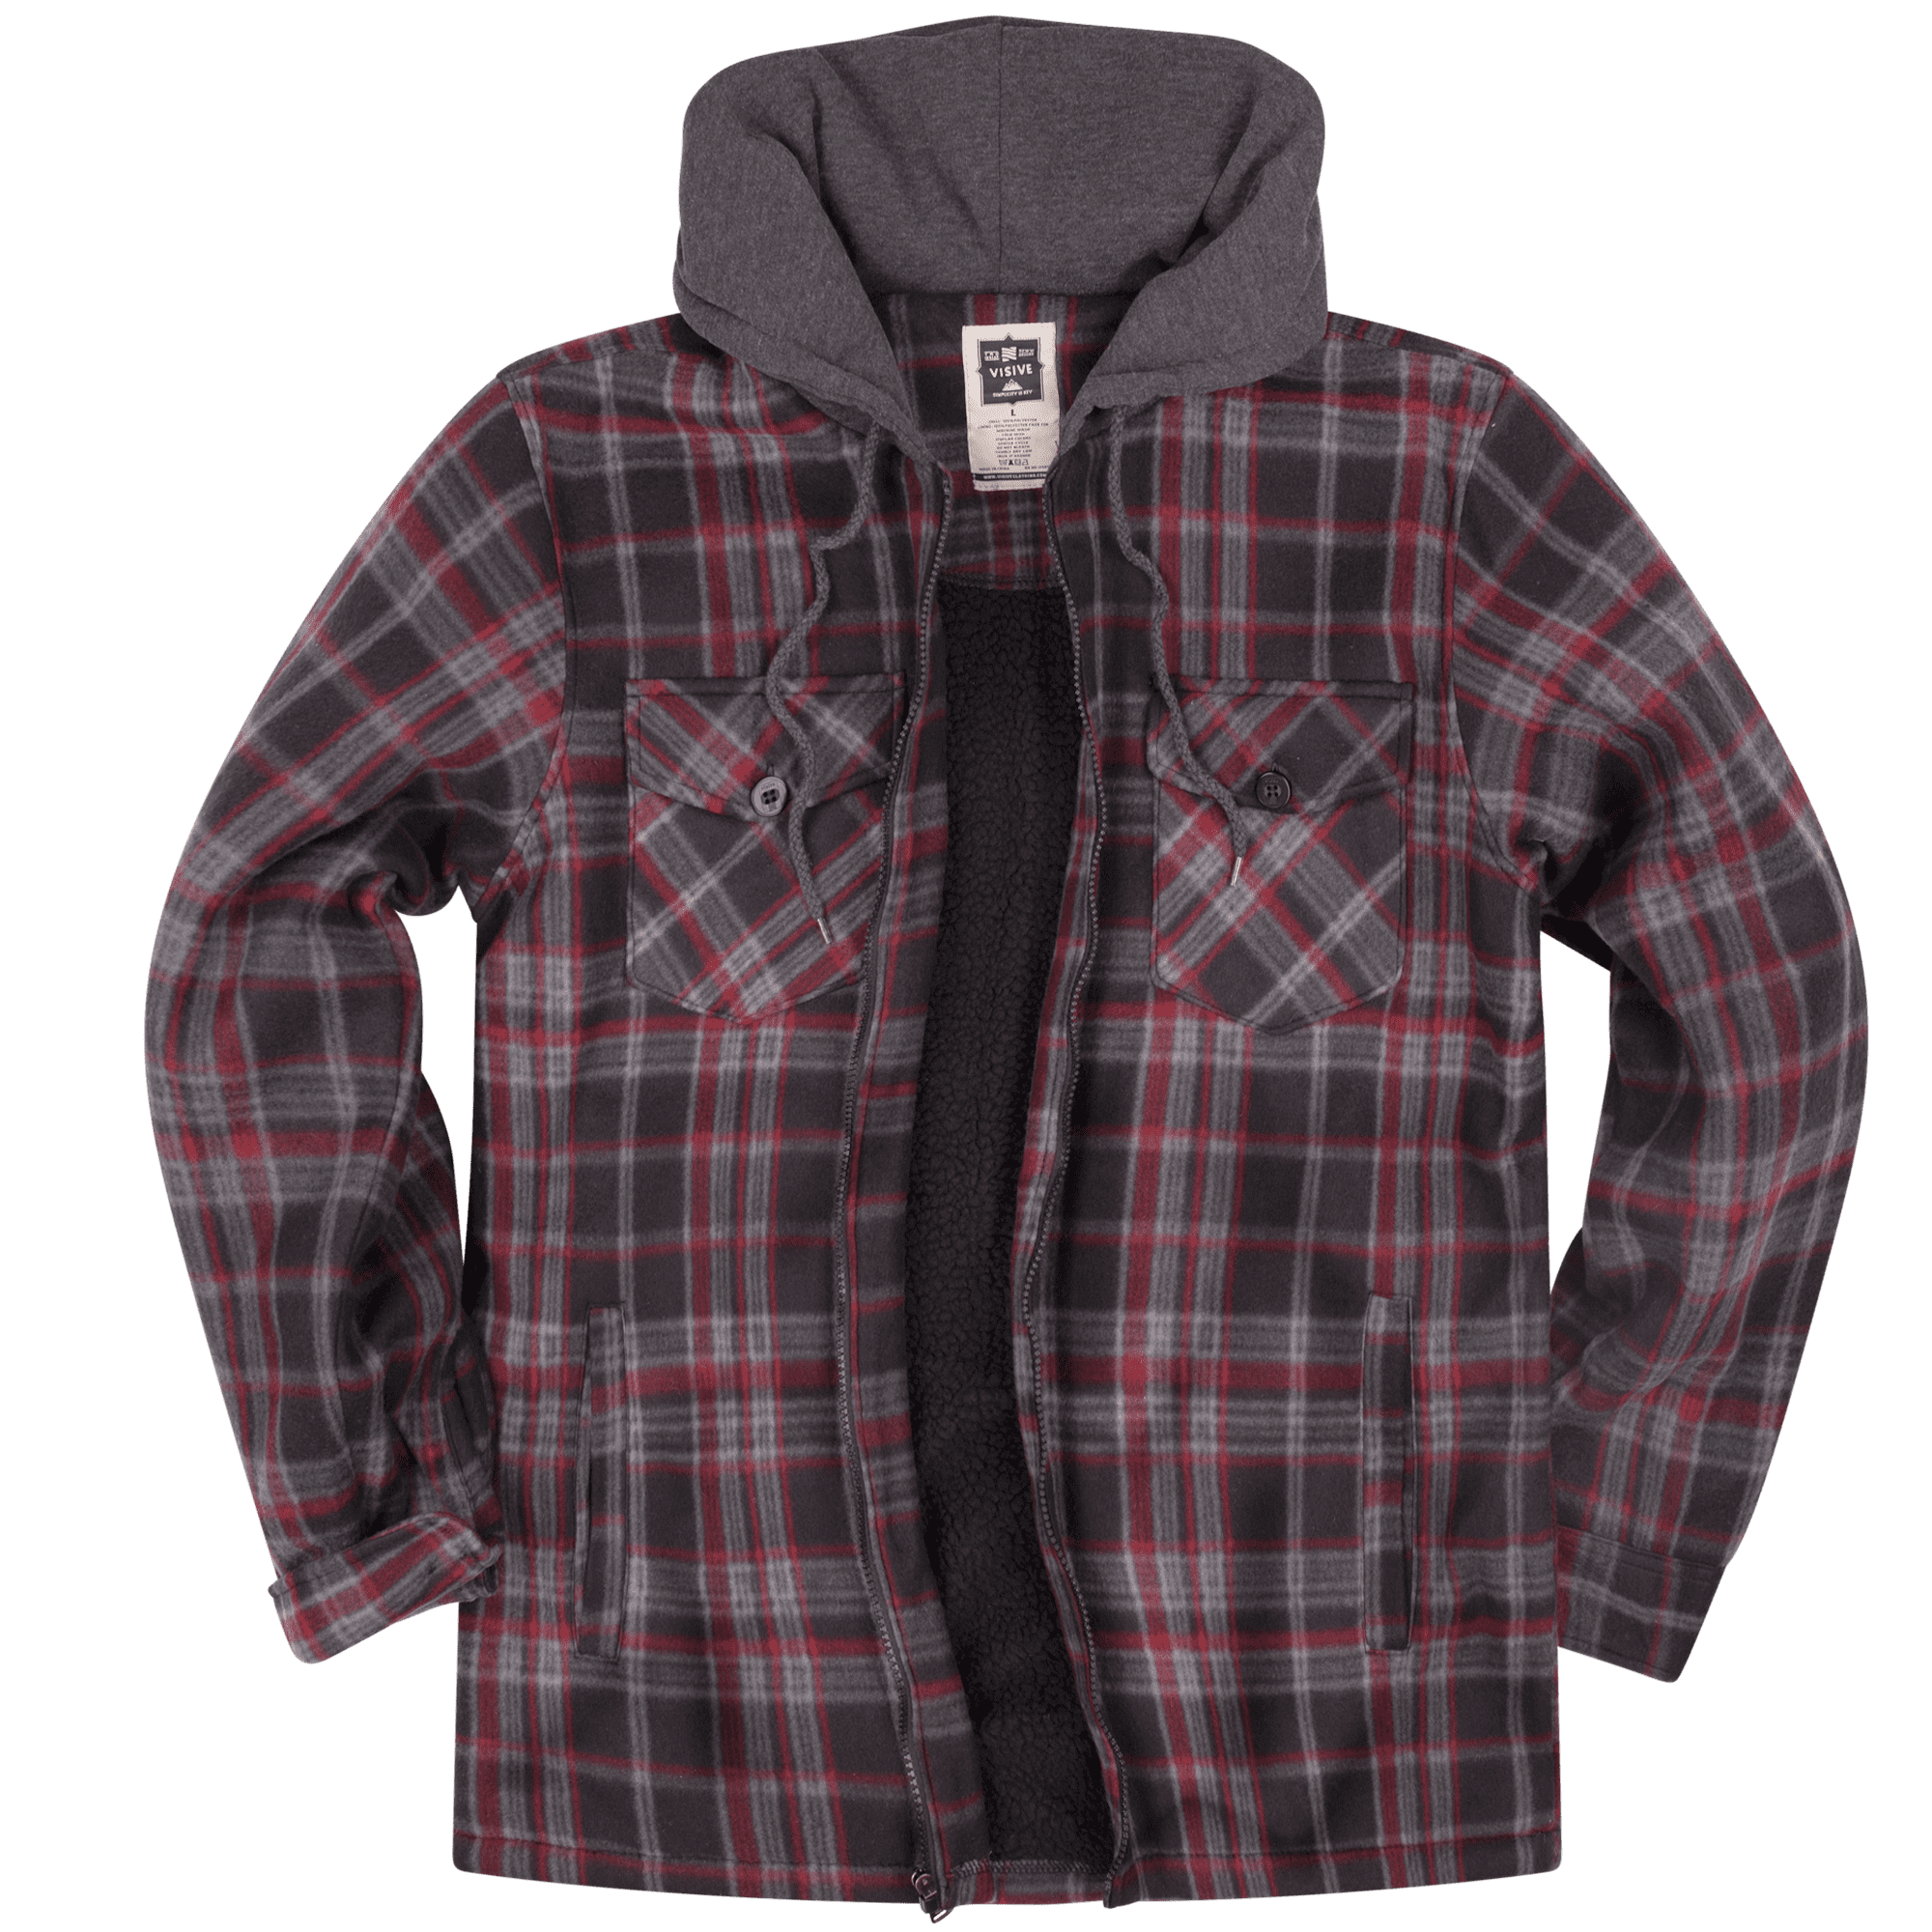 Visive Men's Sherpa-Lined Flannel Hoodie Jacket - Warm Zip-Up Layer for ...